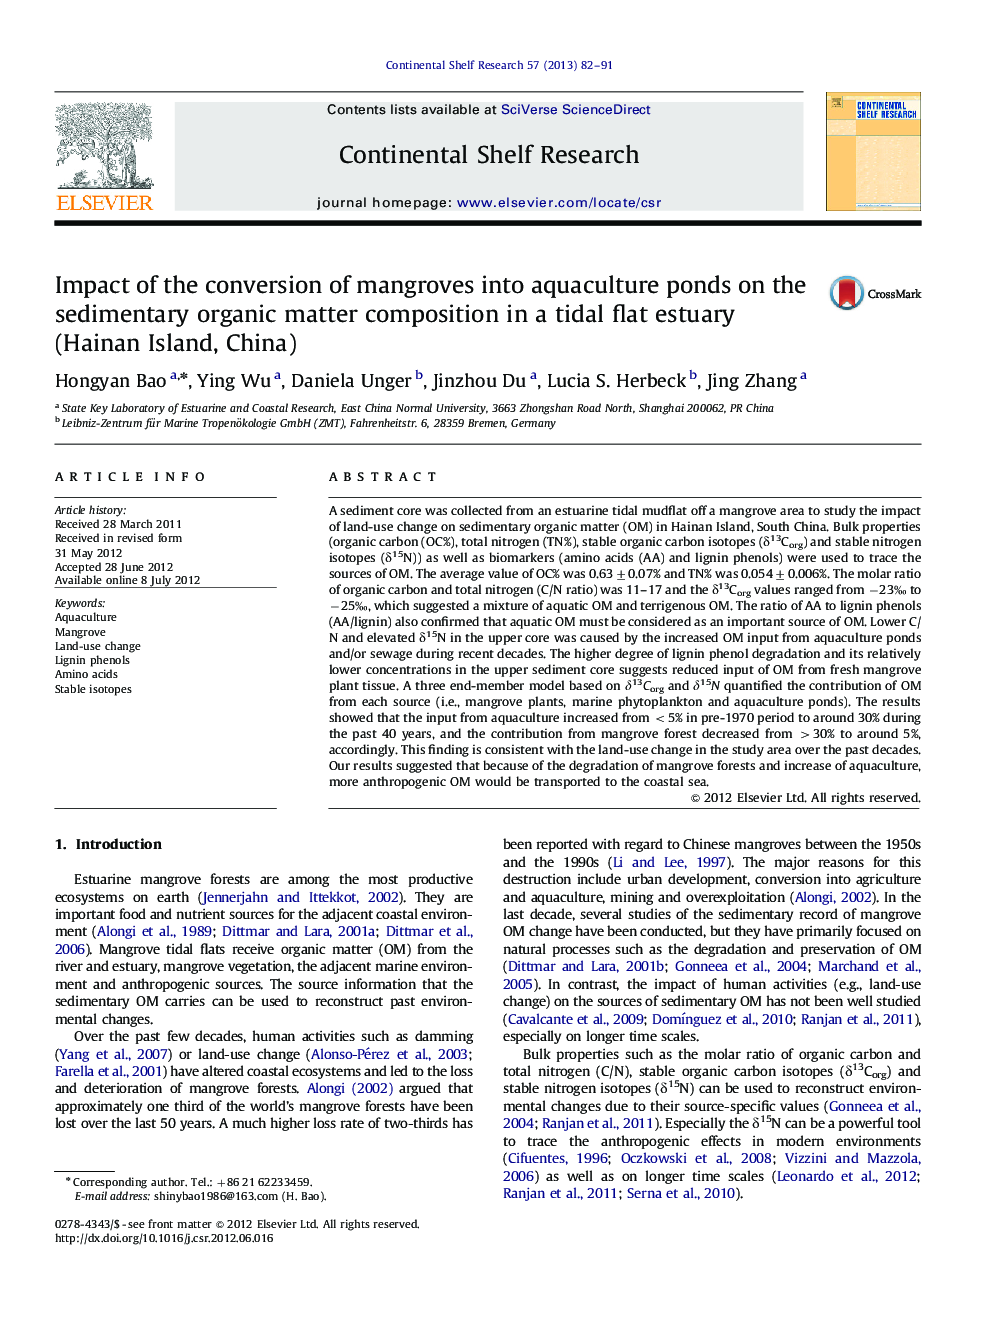 Impact of the conversion of mangroves into aquaculture ponds on the sedimentary organic matter composition in a tidal flat estuary (Hainan Island, China)